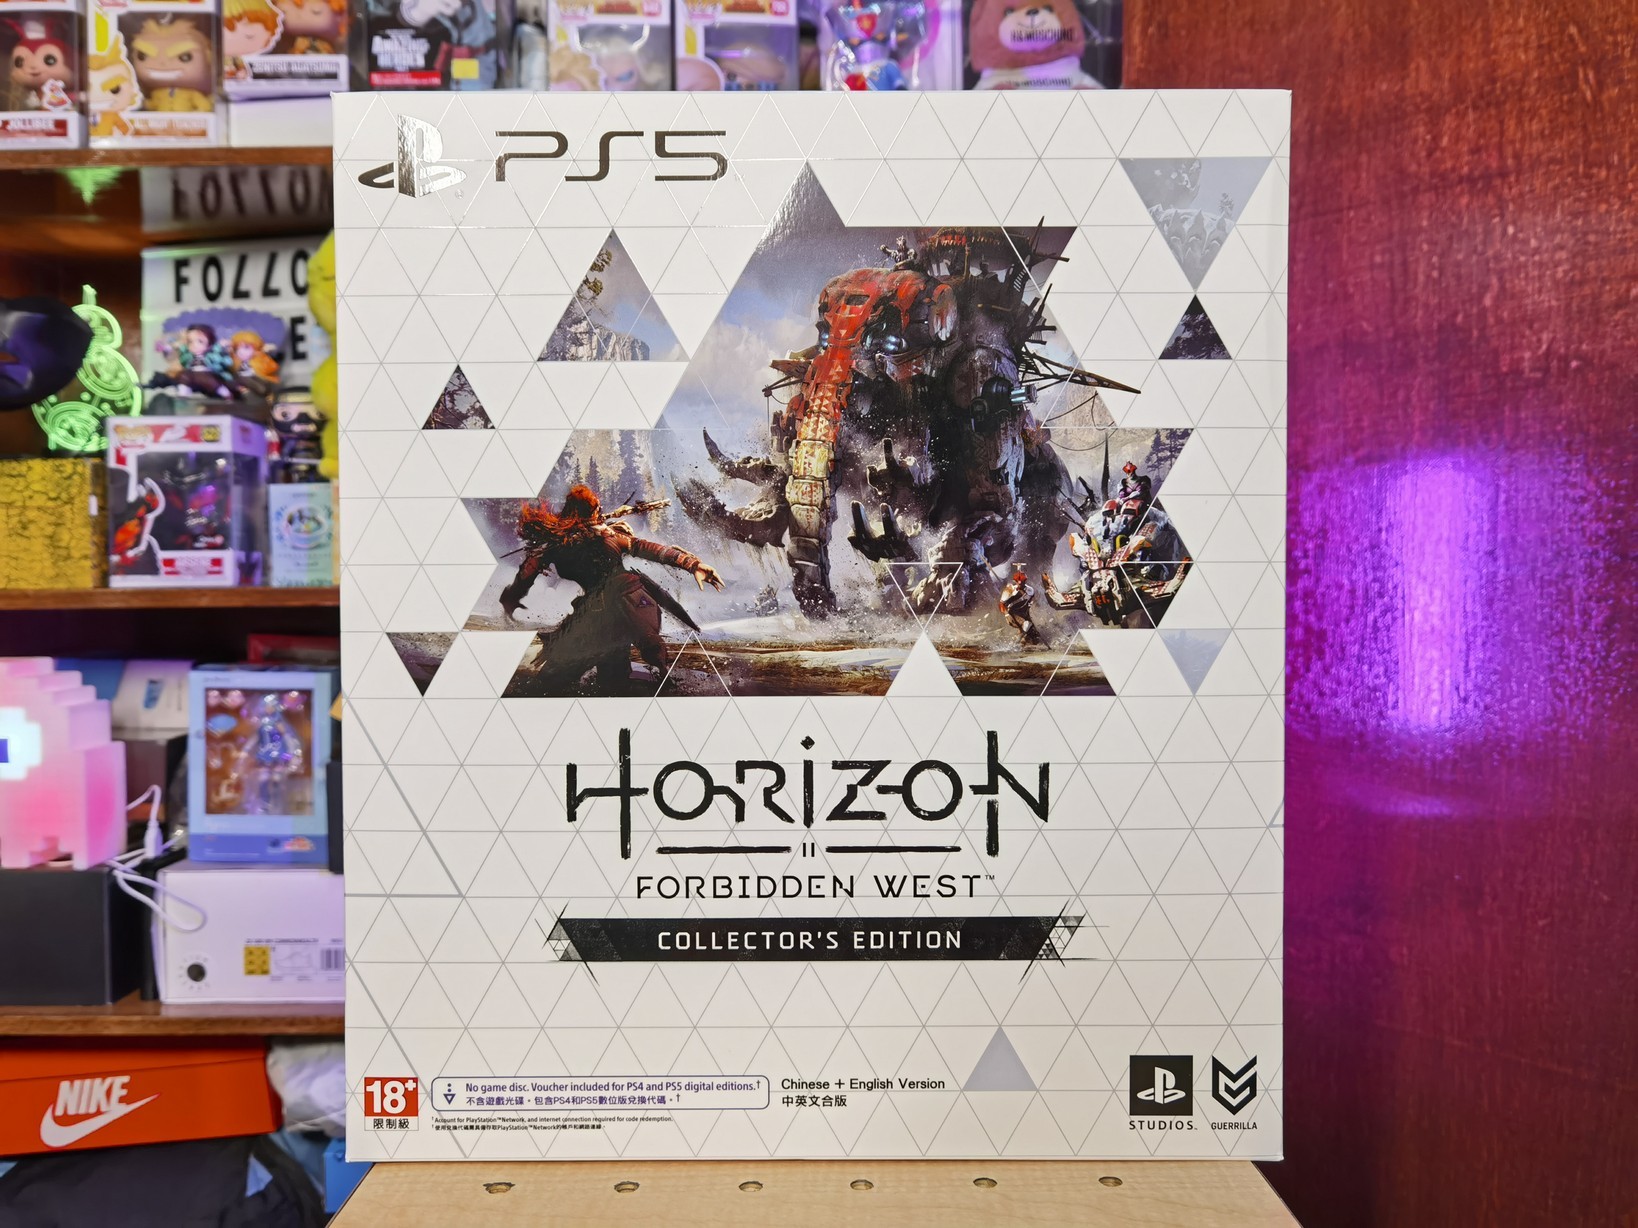 Horizon: Forbidden West Complete Edition PS5 Unboxing 